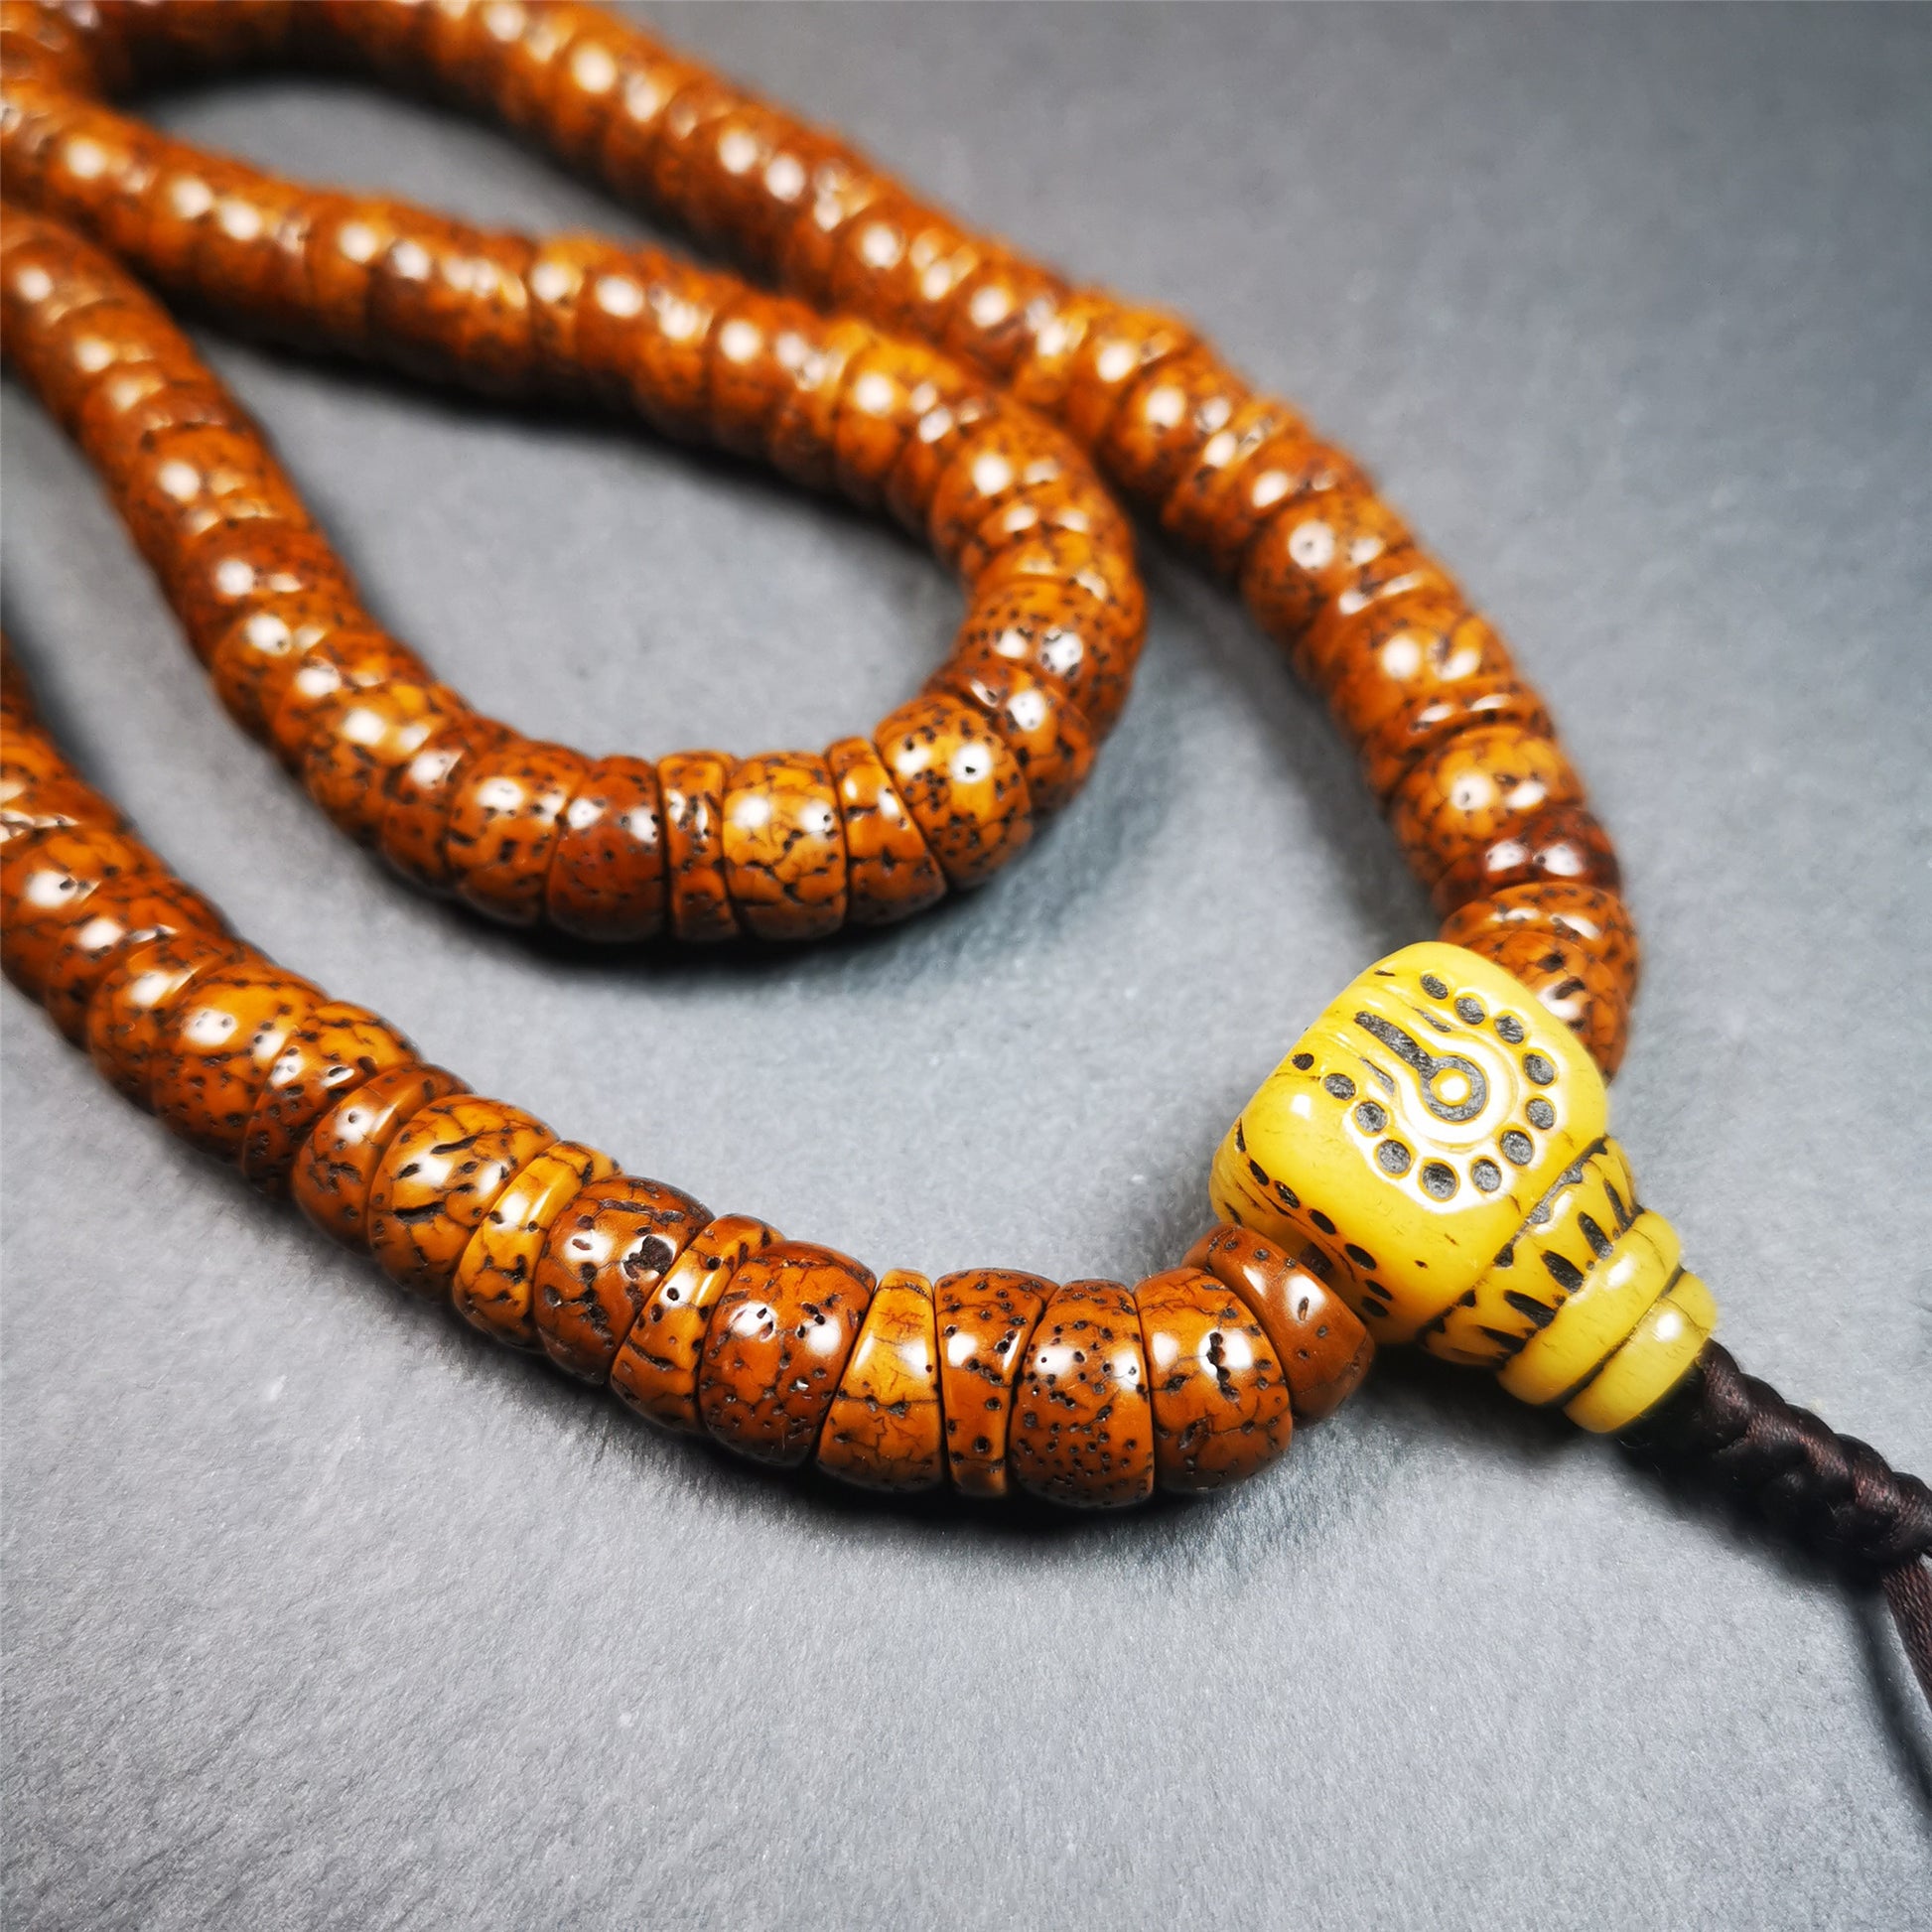 This lotus seed mala was collected from Baiyu county,about 40 years old,hold and blessed by a lama. It is composed of 108 bodhi seed beads, bevel cut shape,brown color,and 1 yak bone guru bead.